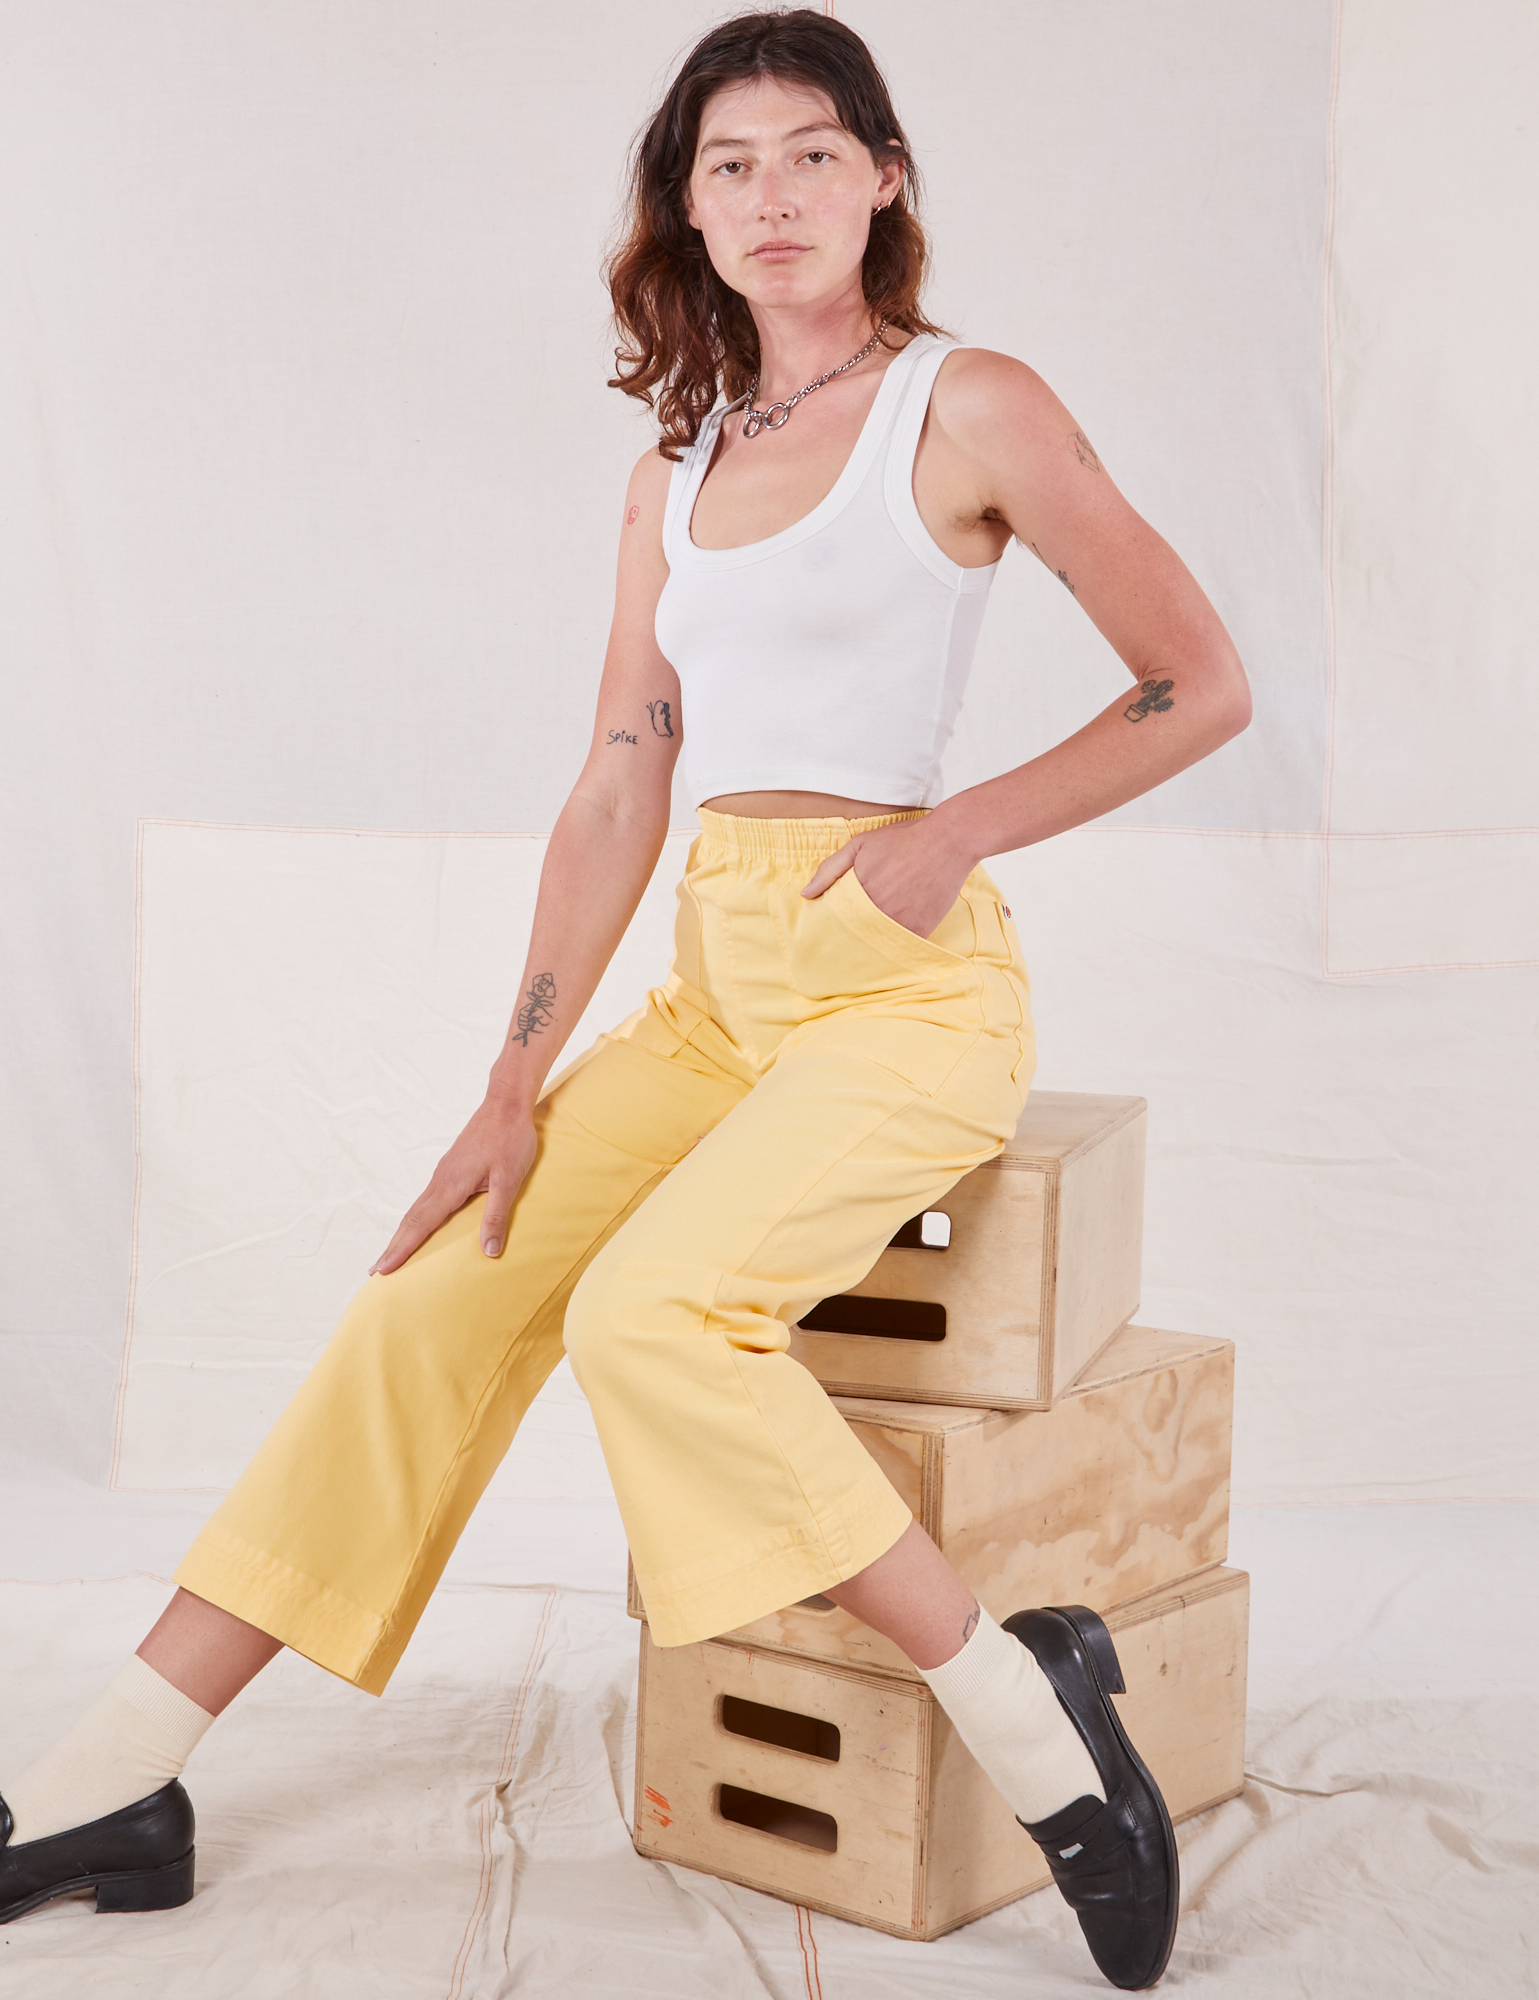 Alex is wearing Action Pants in Butter Yellow and Cropped Tank in vintage tee off-white